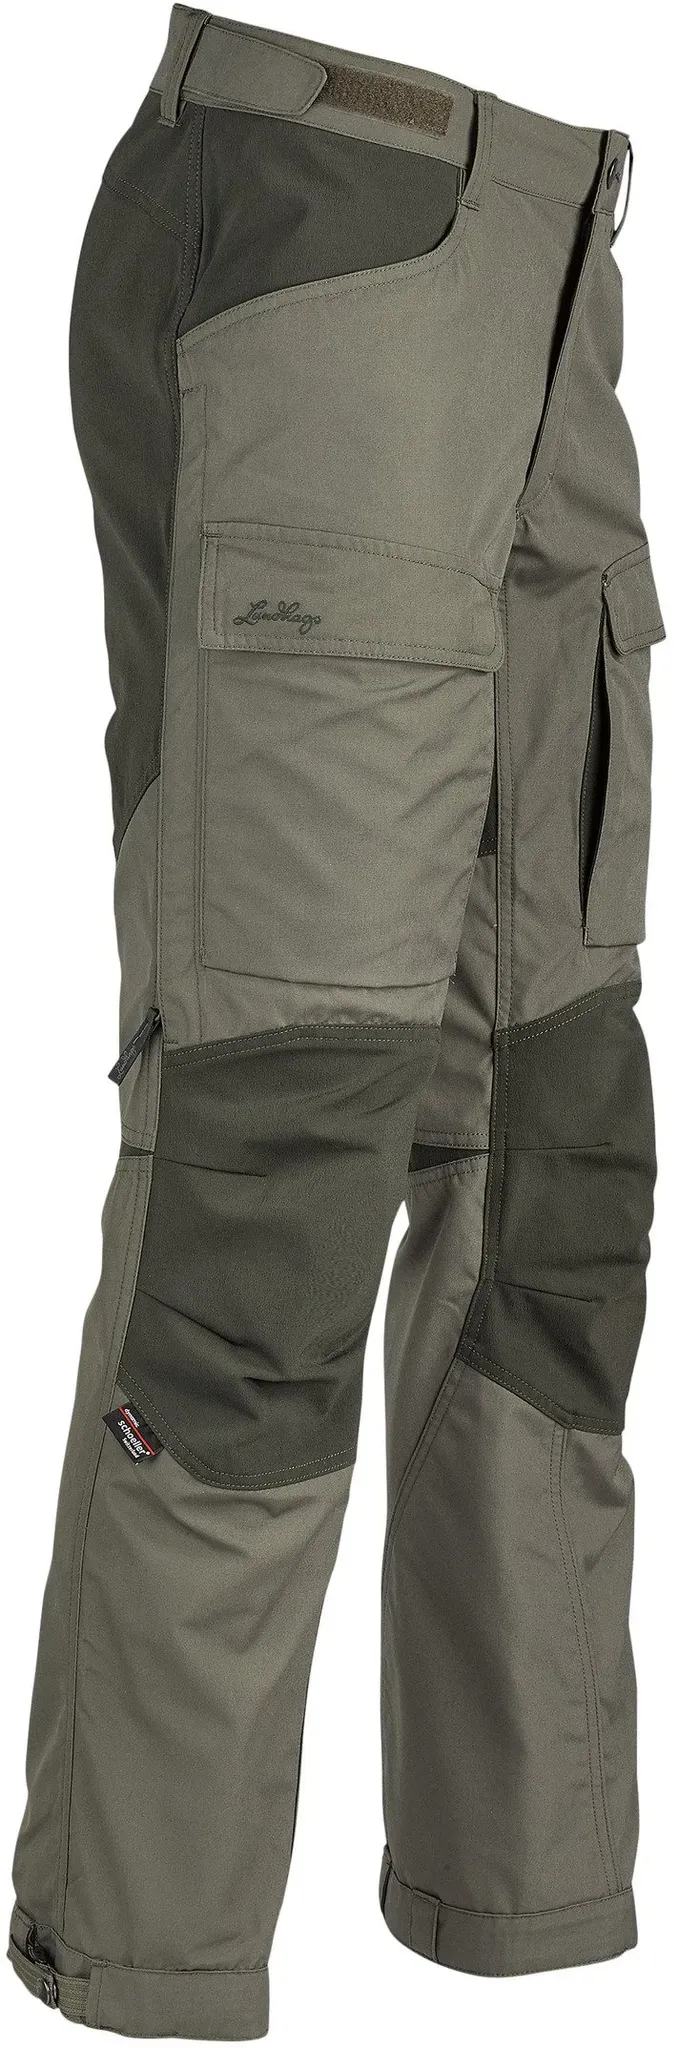 Lundhags Herrenhose Authentic II, forest green-dk forest green, 52